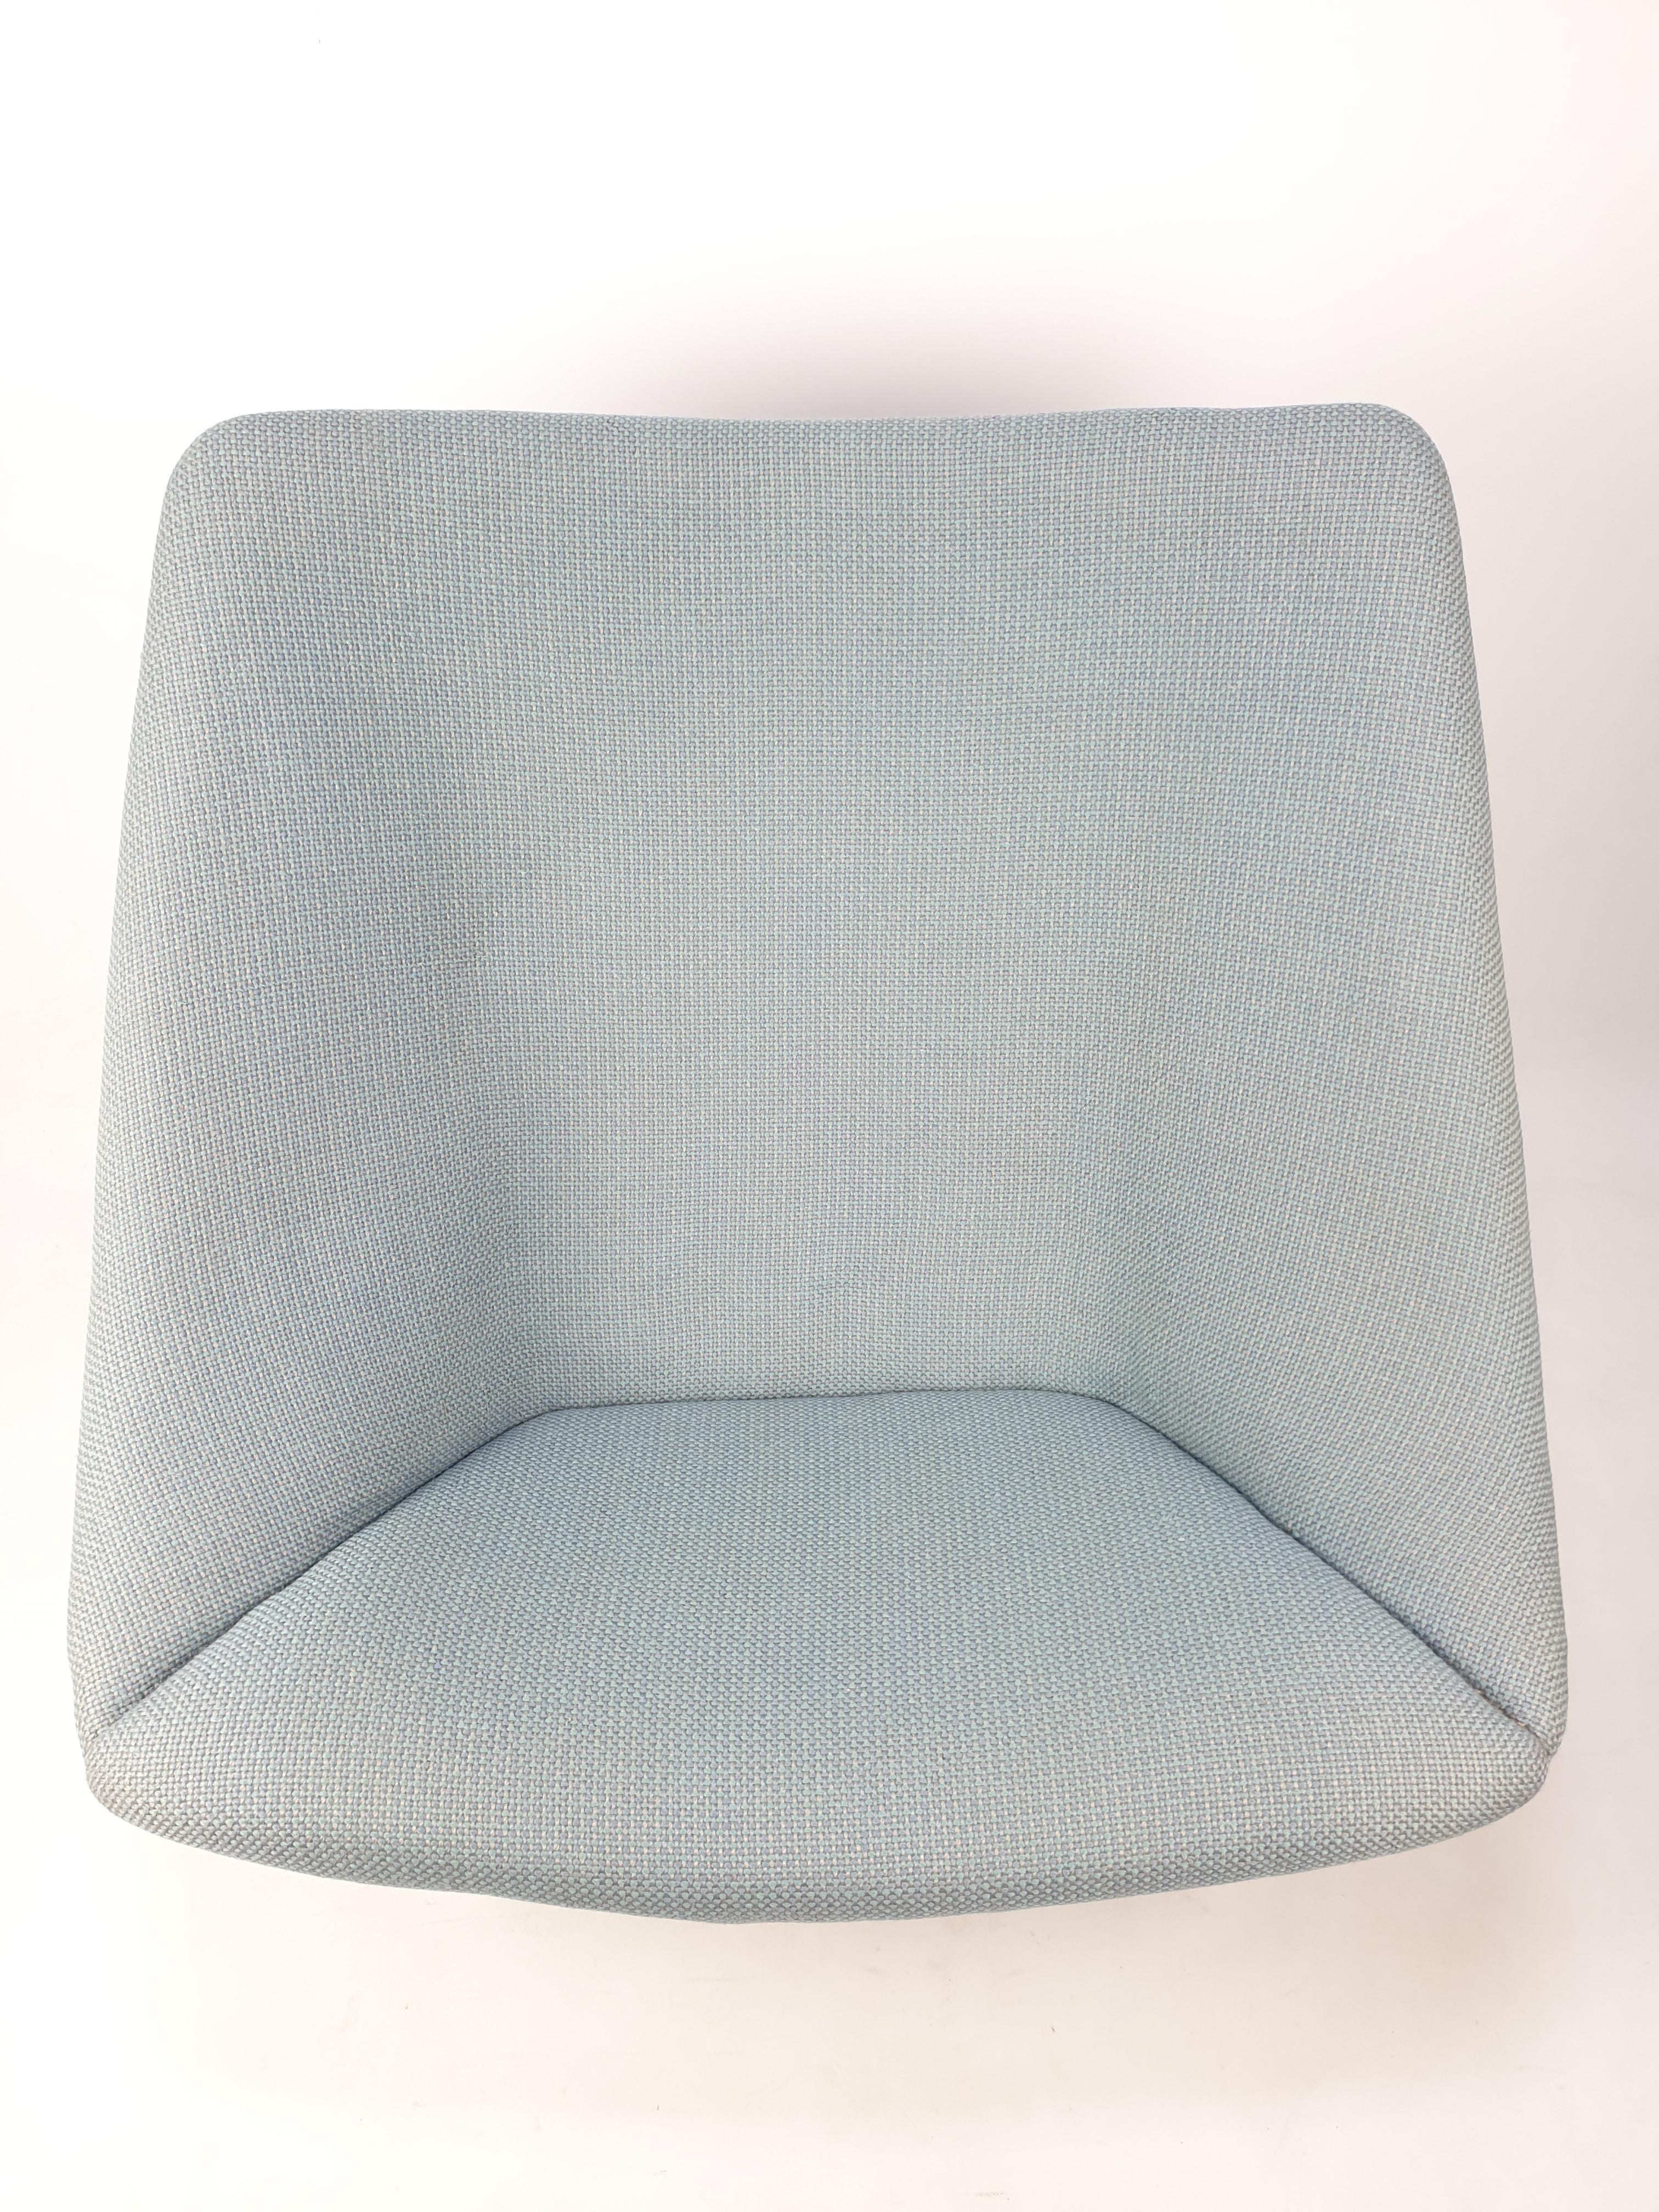 Oyster Chair with Cross Base by Pierre Paulin for Artifort, 1965 In Good Condition For Sale In Oud Beijerland, NL